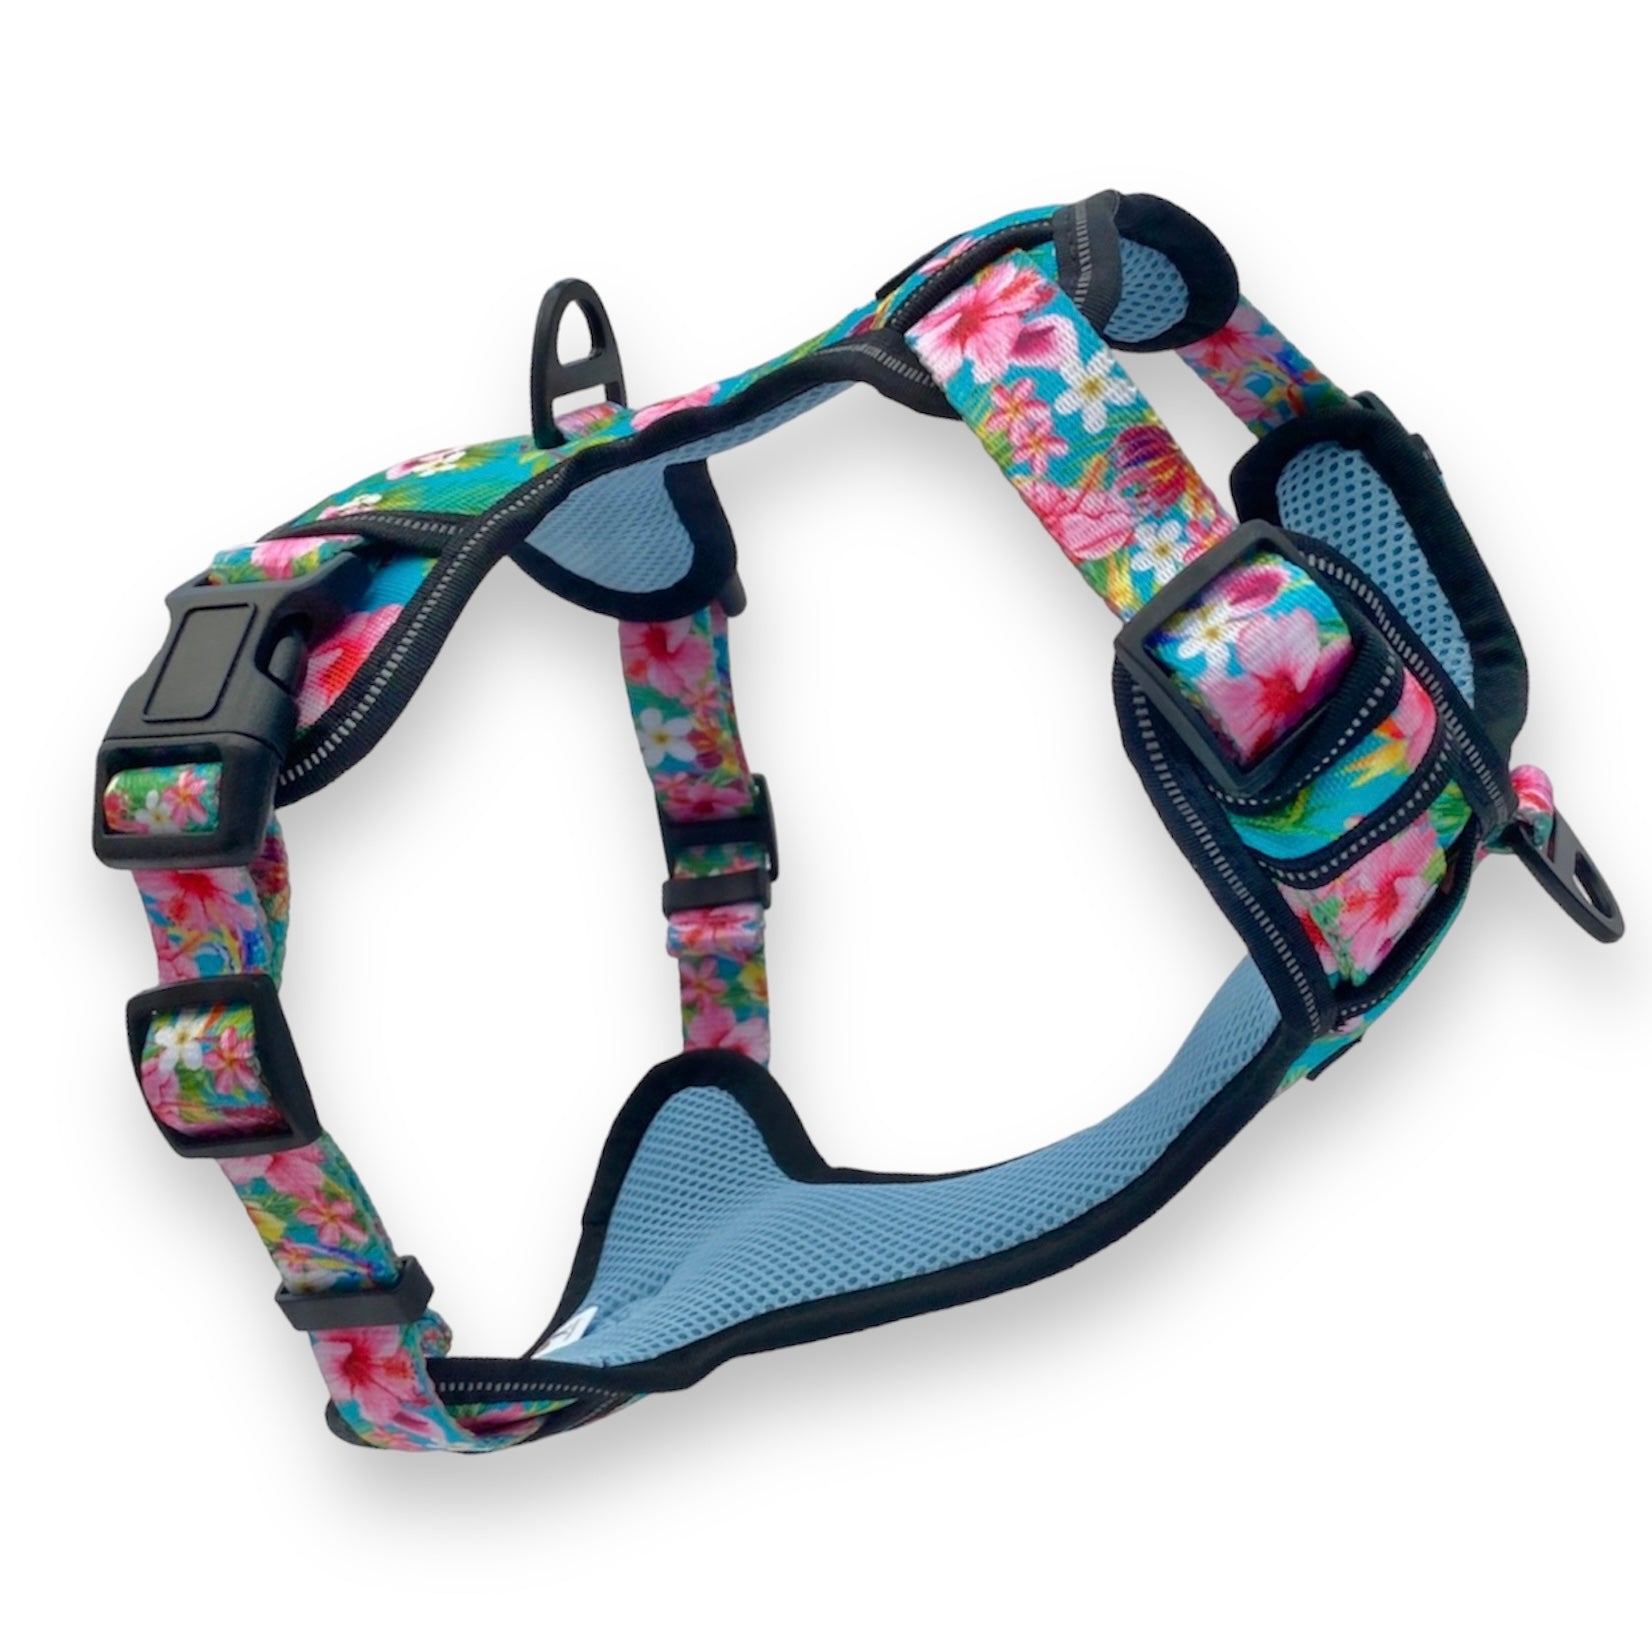 a 3d image of a no pull dog harness from fearless pet in a bright pink floral pattern with a teal blue background